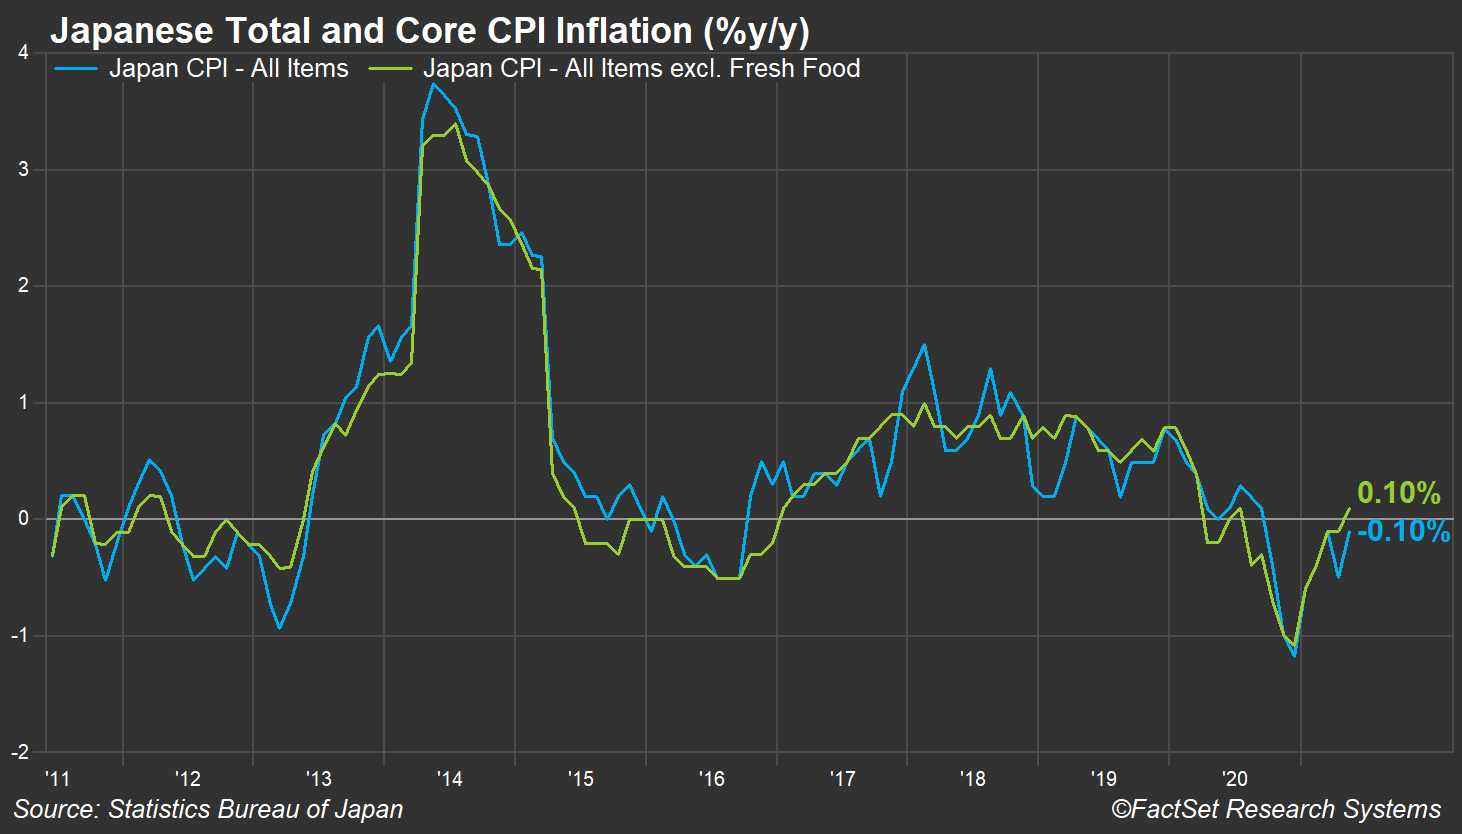 Japan Total and Core CPI Inflation